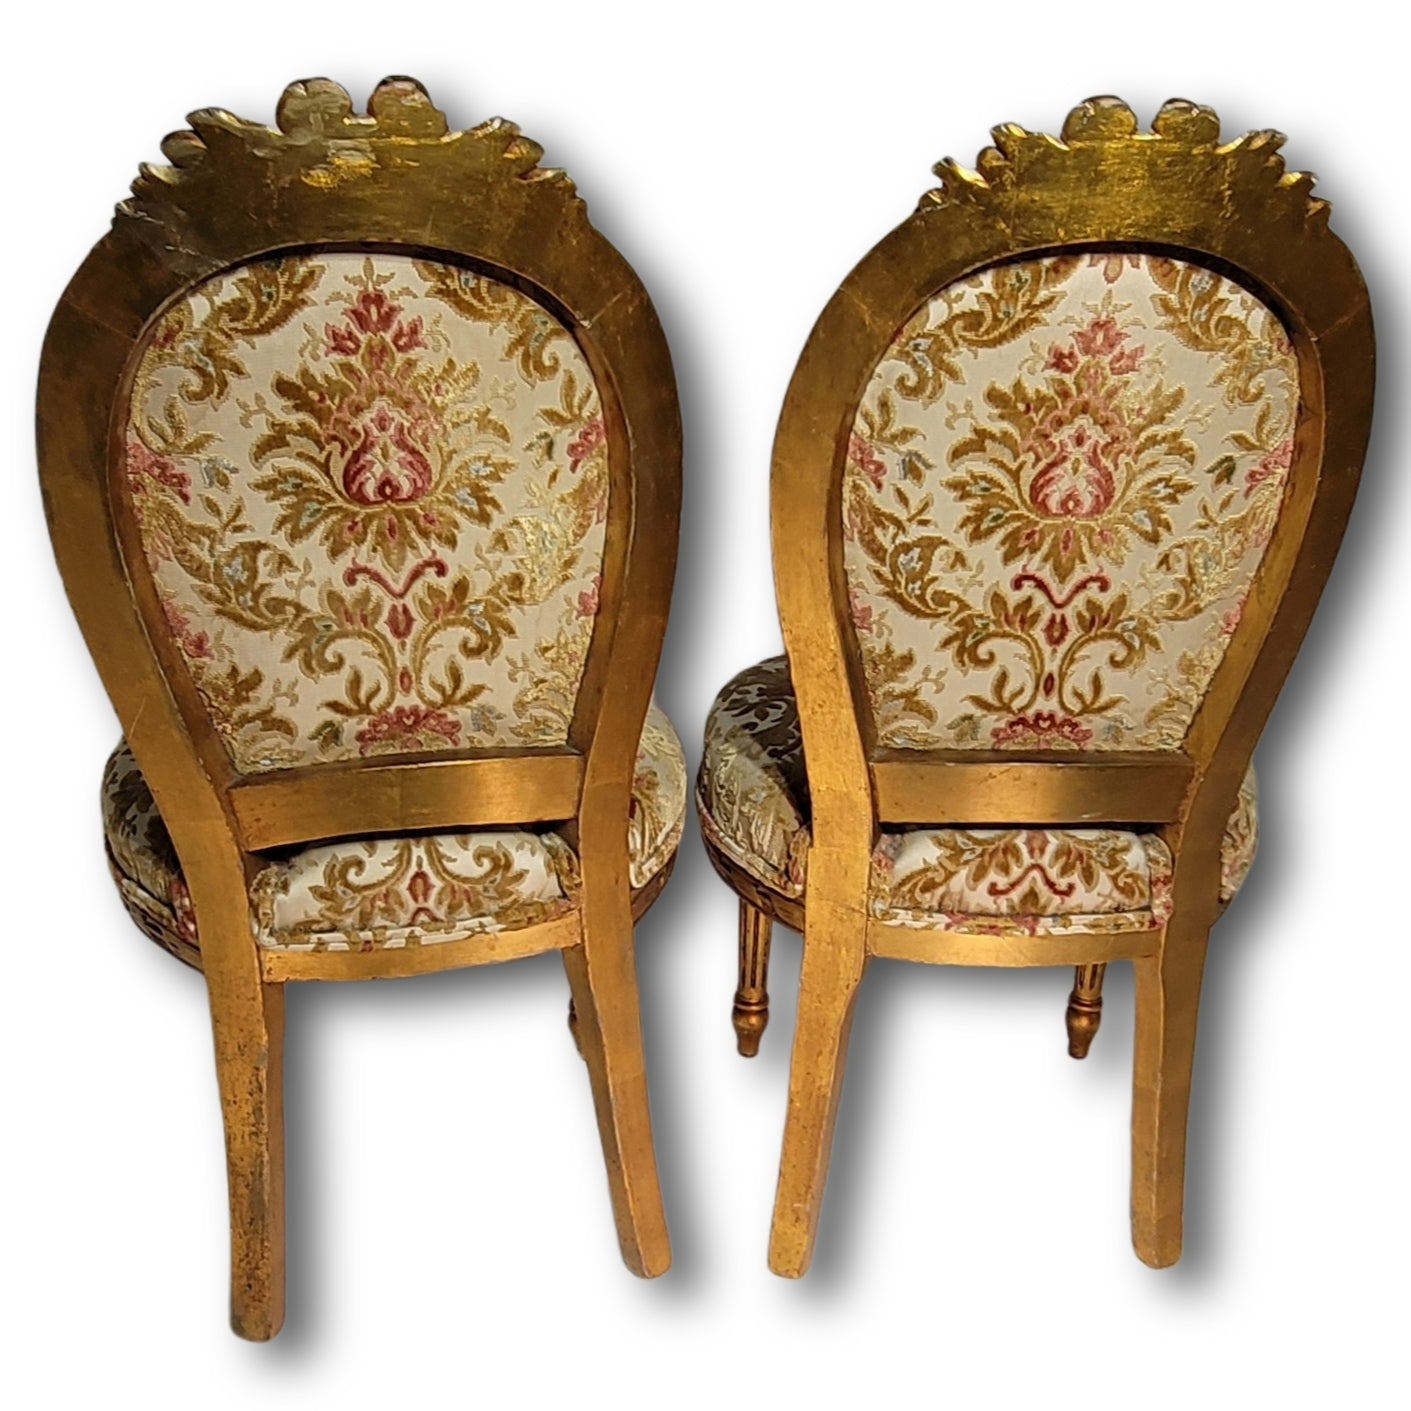 SOLD Ornate Gold Louis XVI Chairs (Set of 2)